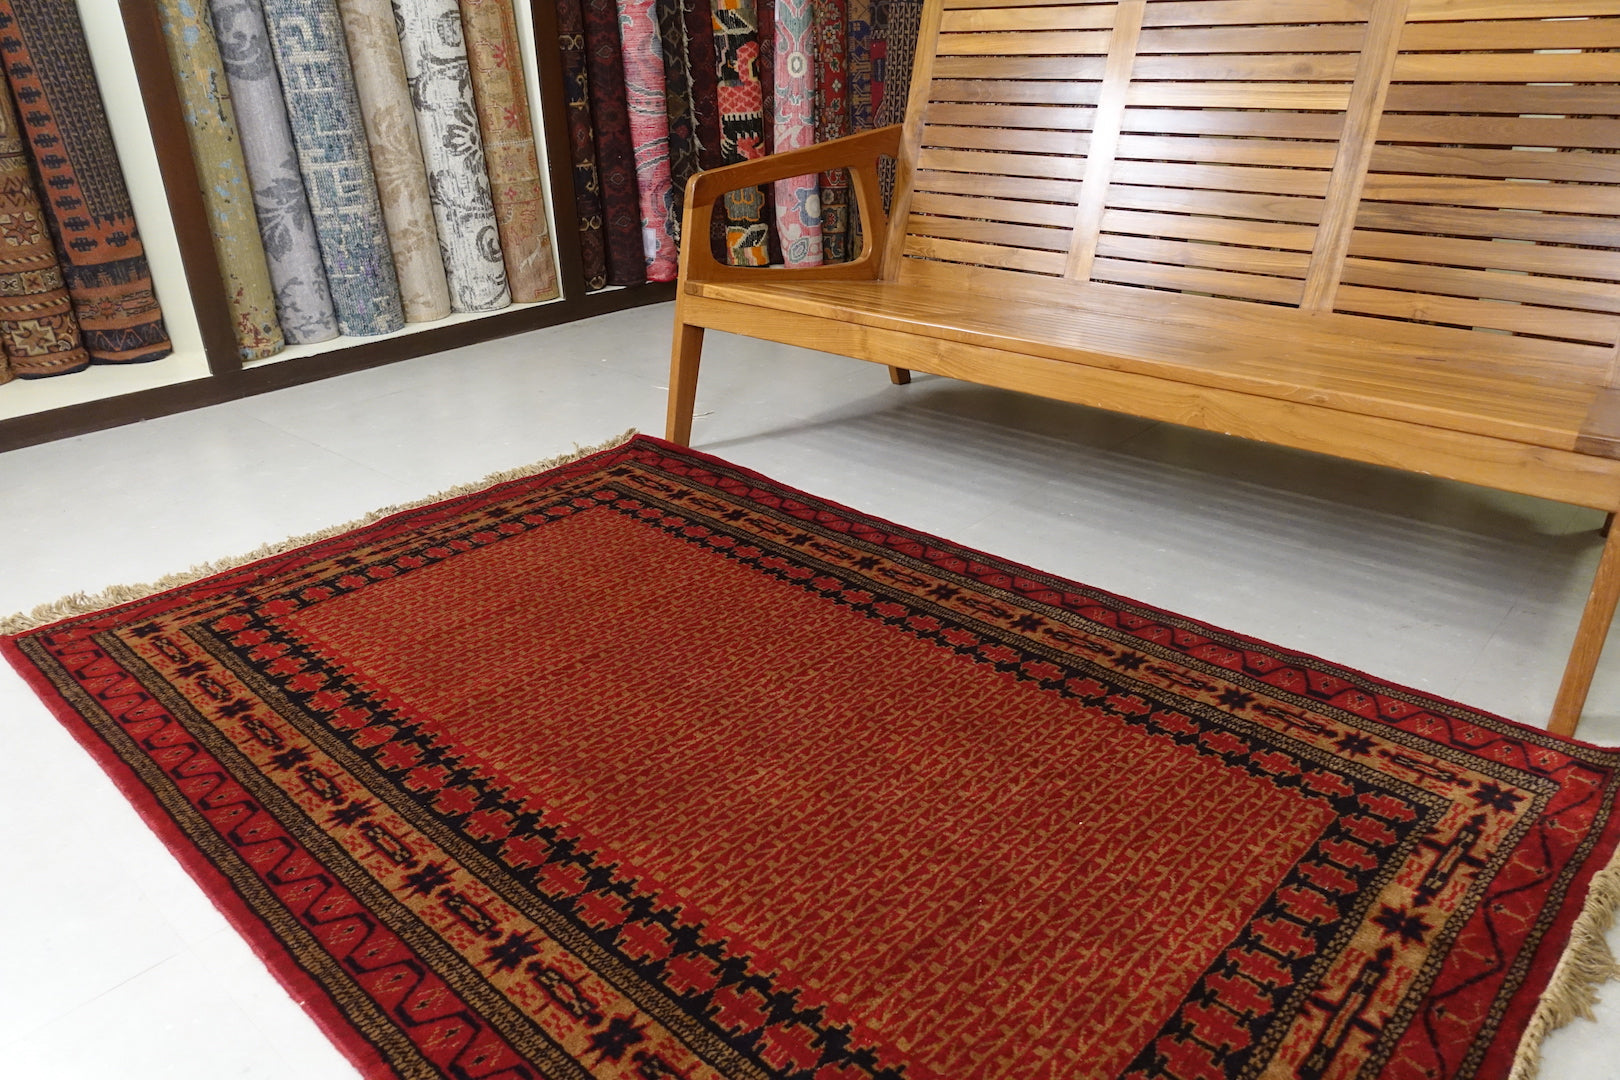 A 4 feet by 6 feet indian wool rug, the colours used on the rug are rust,brown,orange and dark blue.